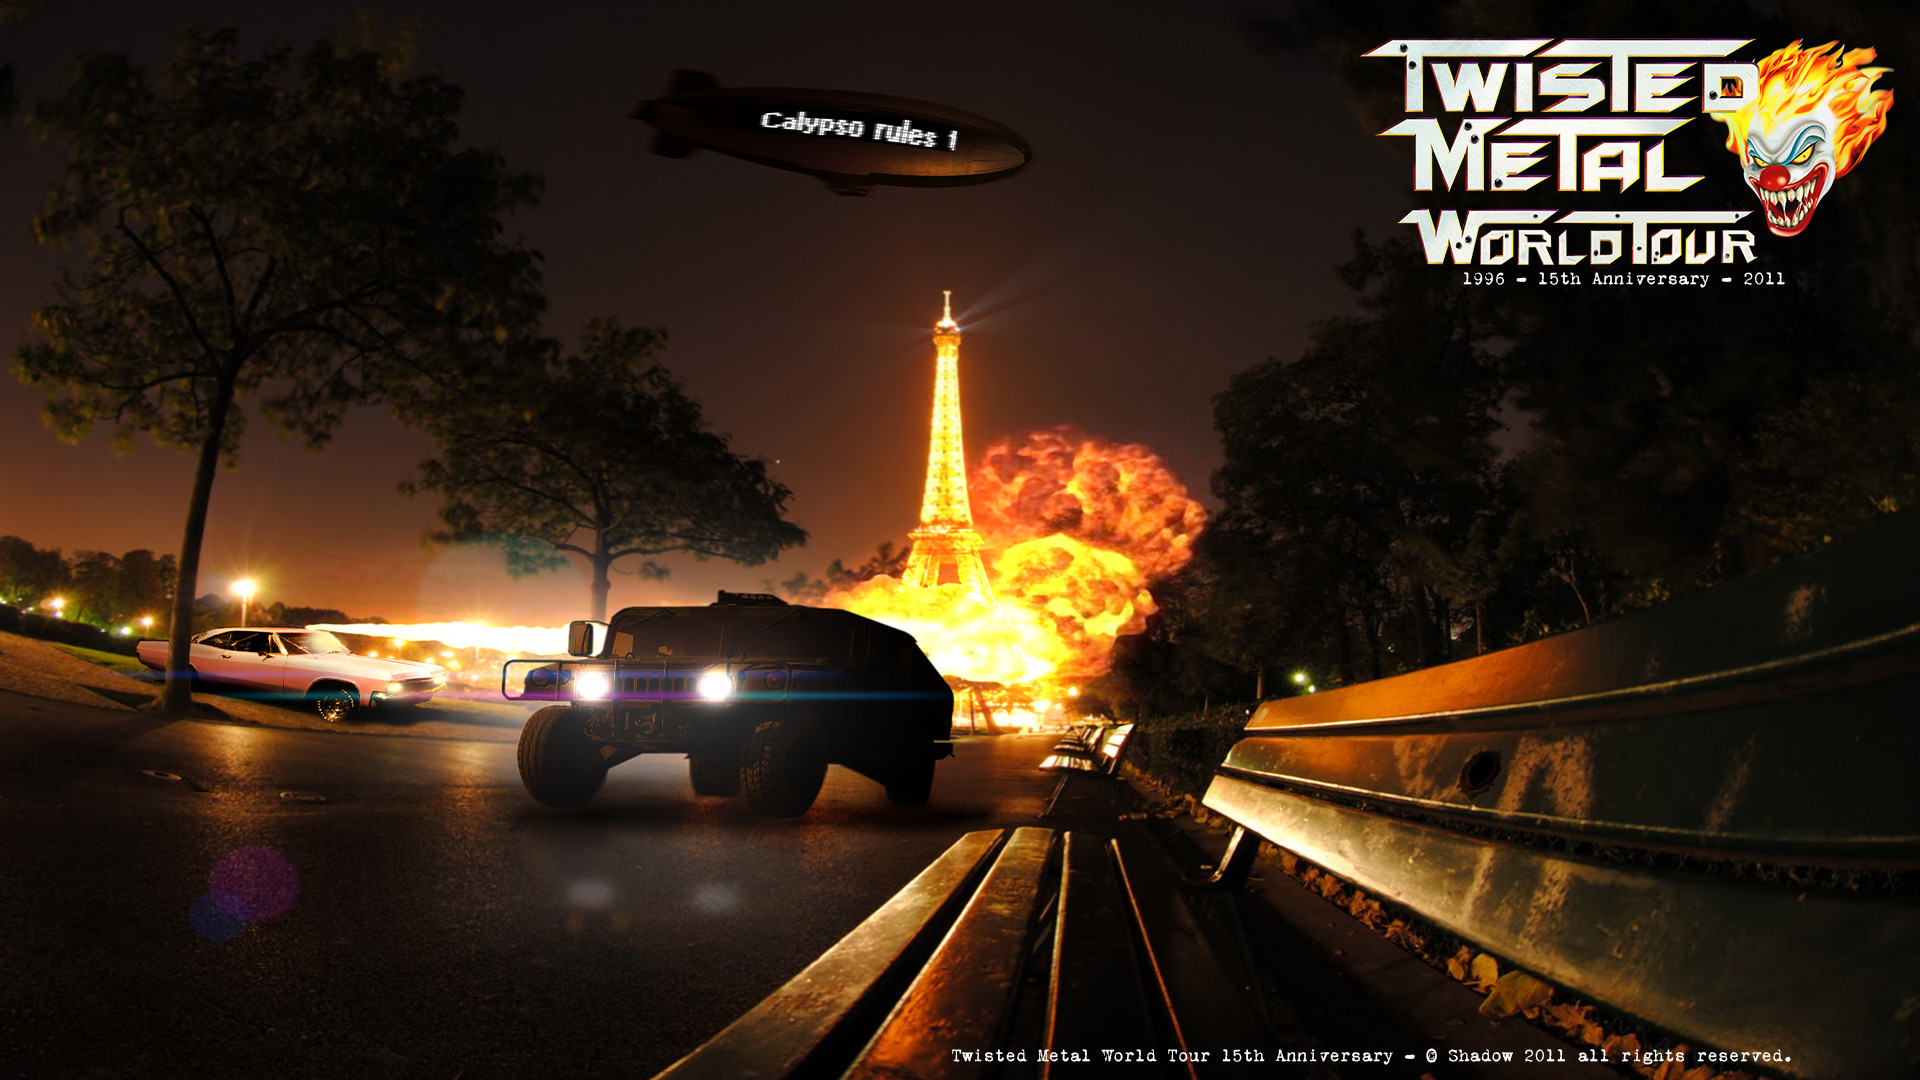 1920x1080 Twisted Metal Images FemaleCelebrity 